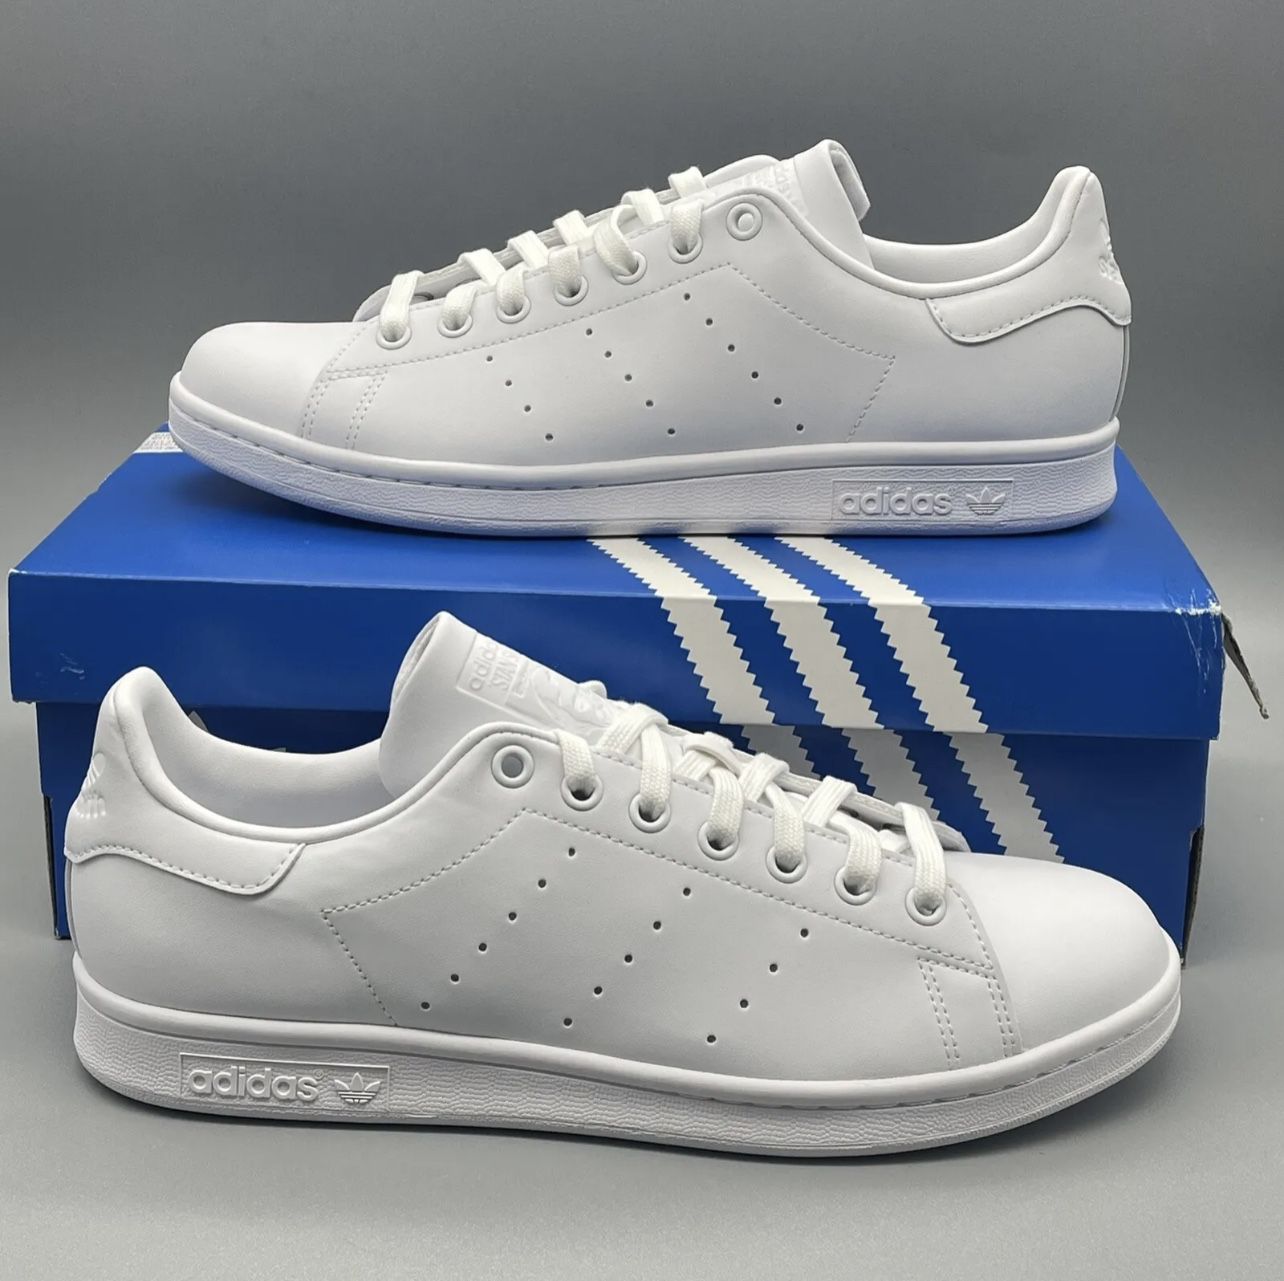 Adidas Originals Womens Size 9.5 Stan Smith White Casual Shoes Q47225 New for Sale in Inglewood, CA - OfferUp